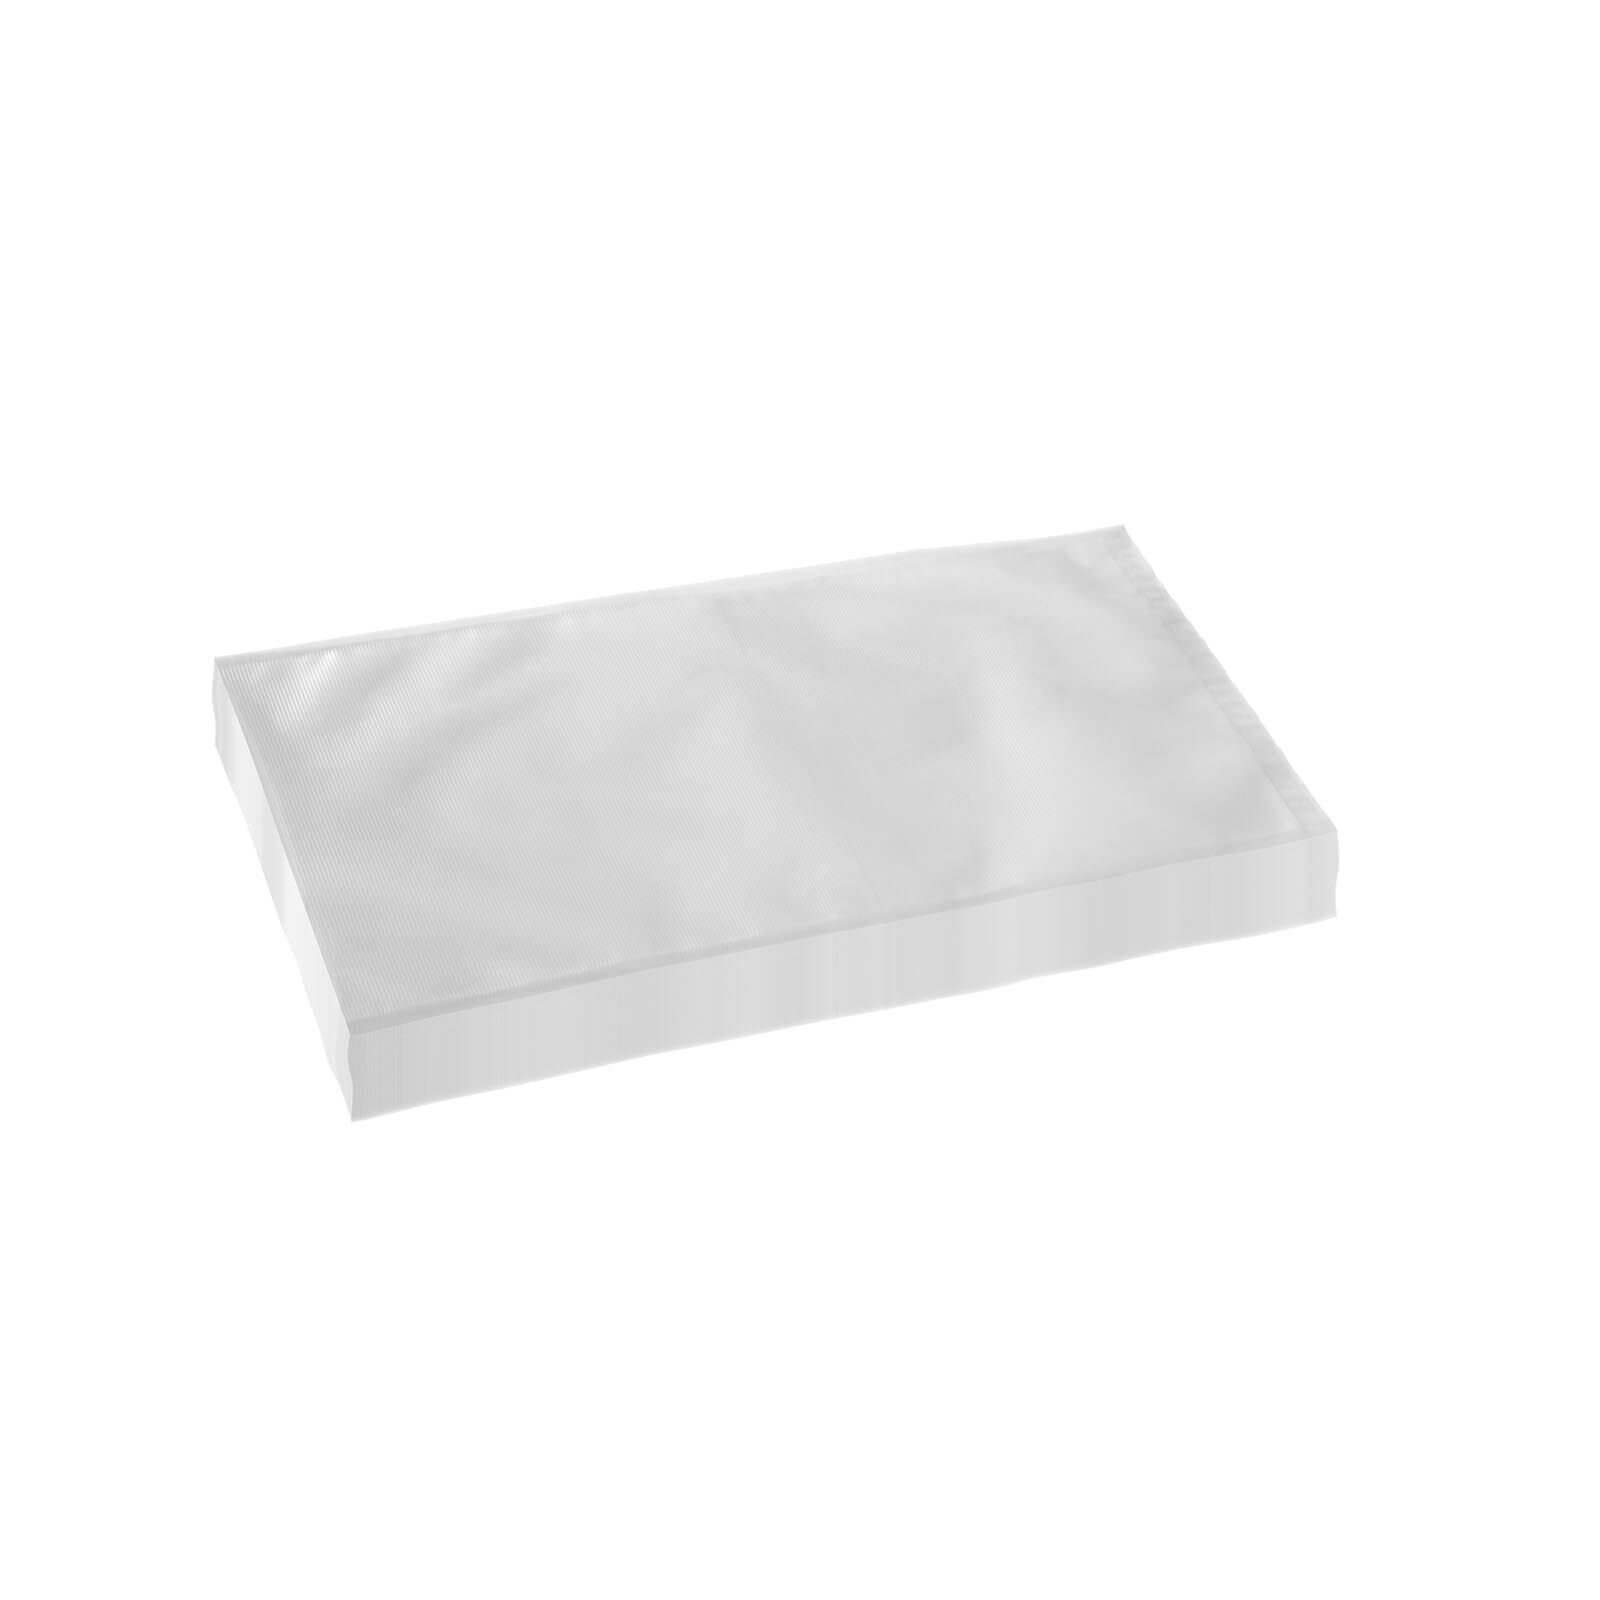 Royal Catering Vacuum Packaging Bags - 30 x 20 cm - 200 pieces RCVB-20X30-200